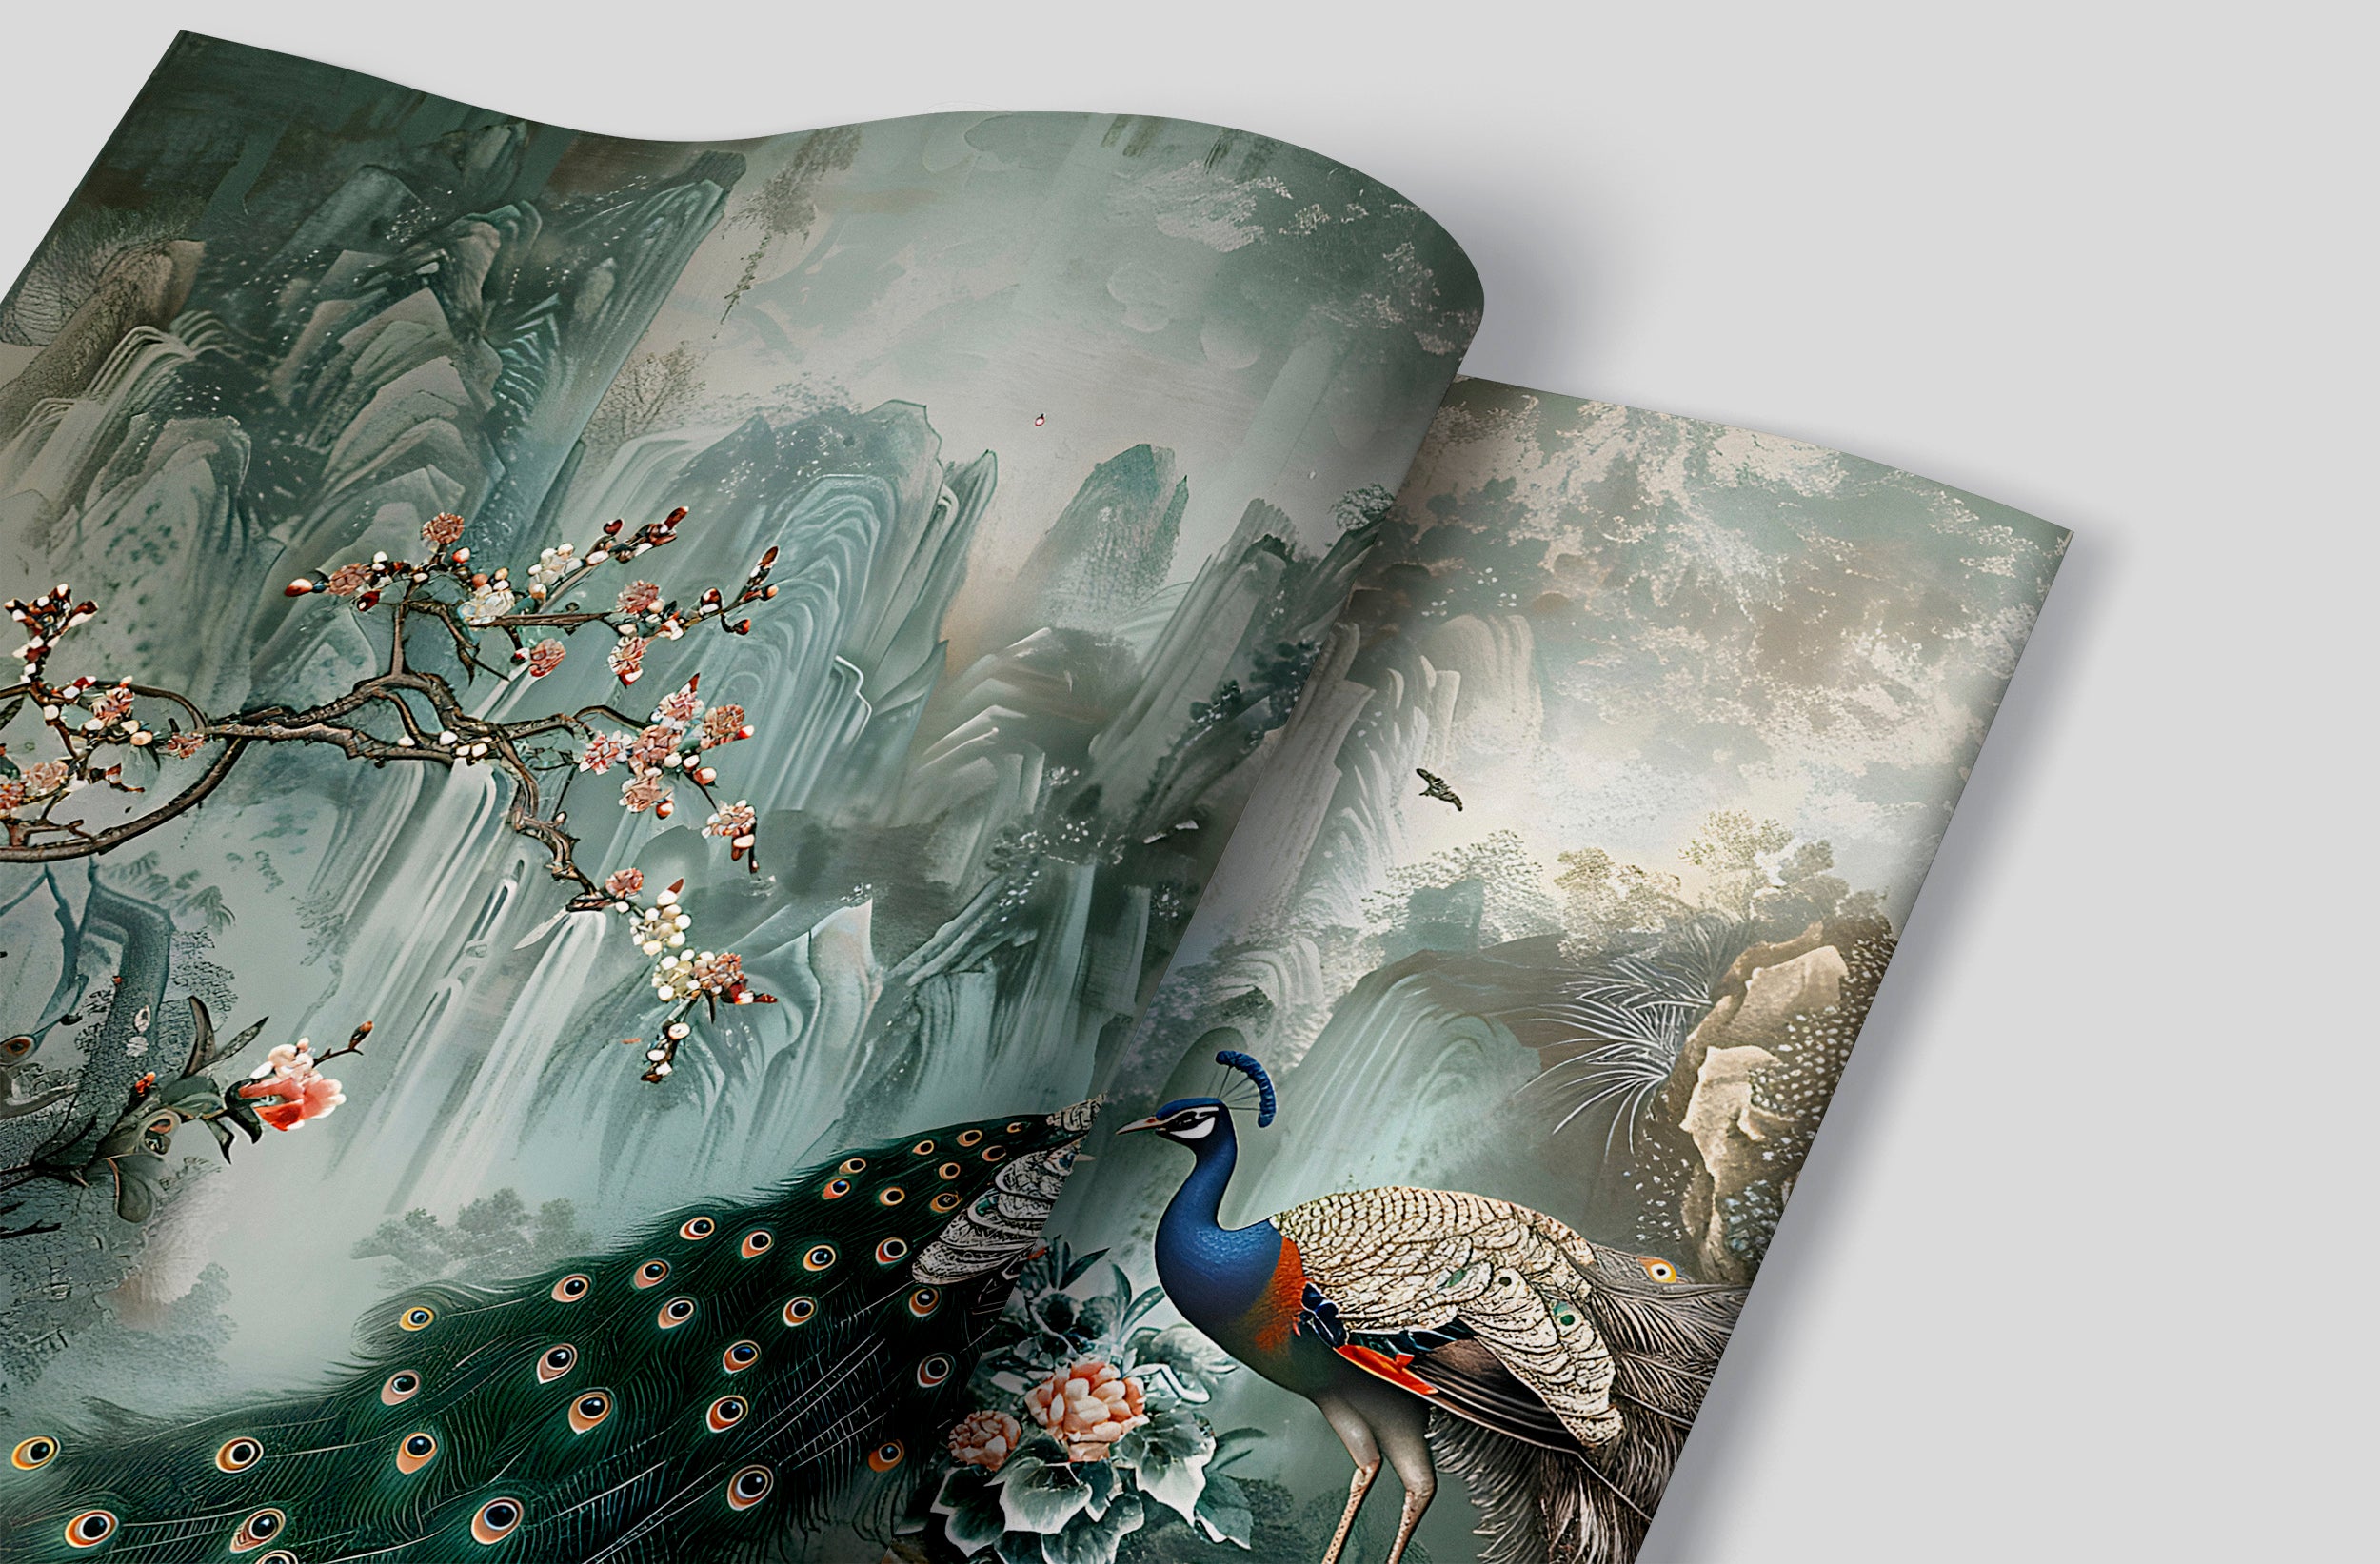 Green Chinoiserie Wallpaper, Peacock Wall Mural, Peel and Stick Abstract Chinese Art, Removable Vintage Decor with Birds and Flowers